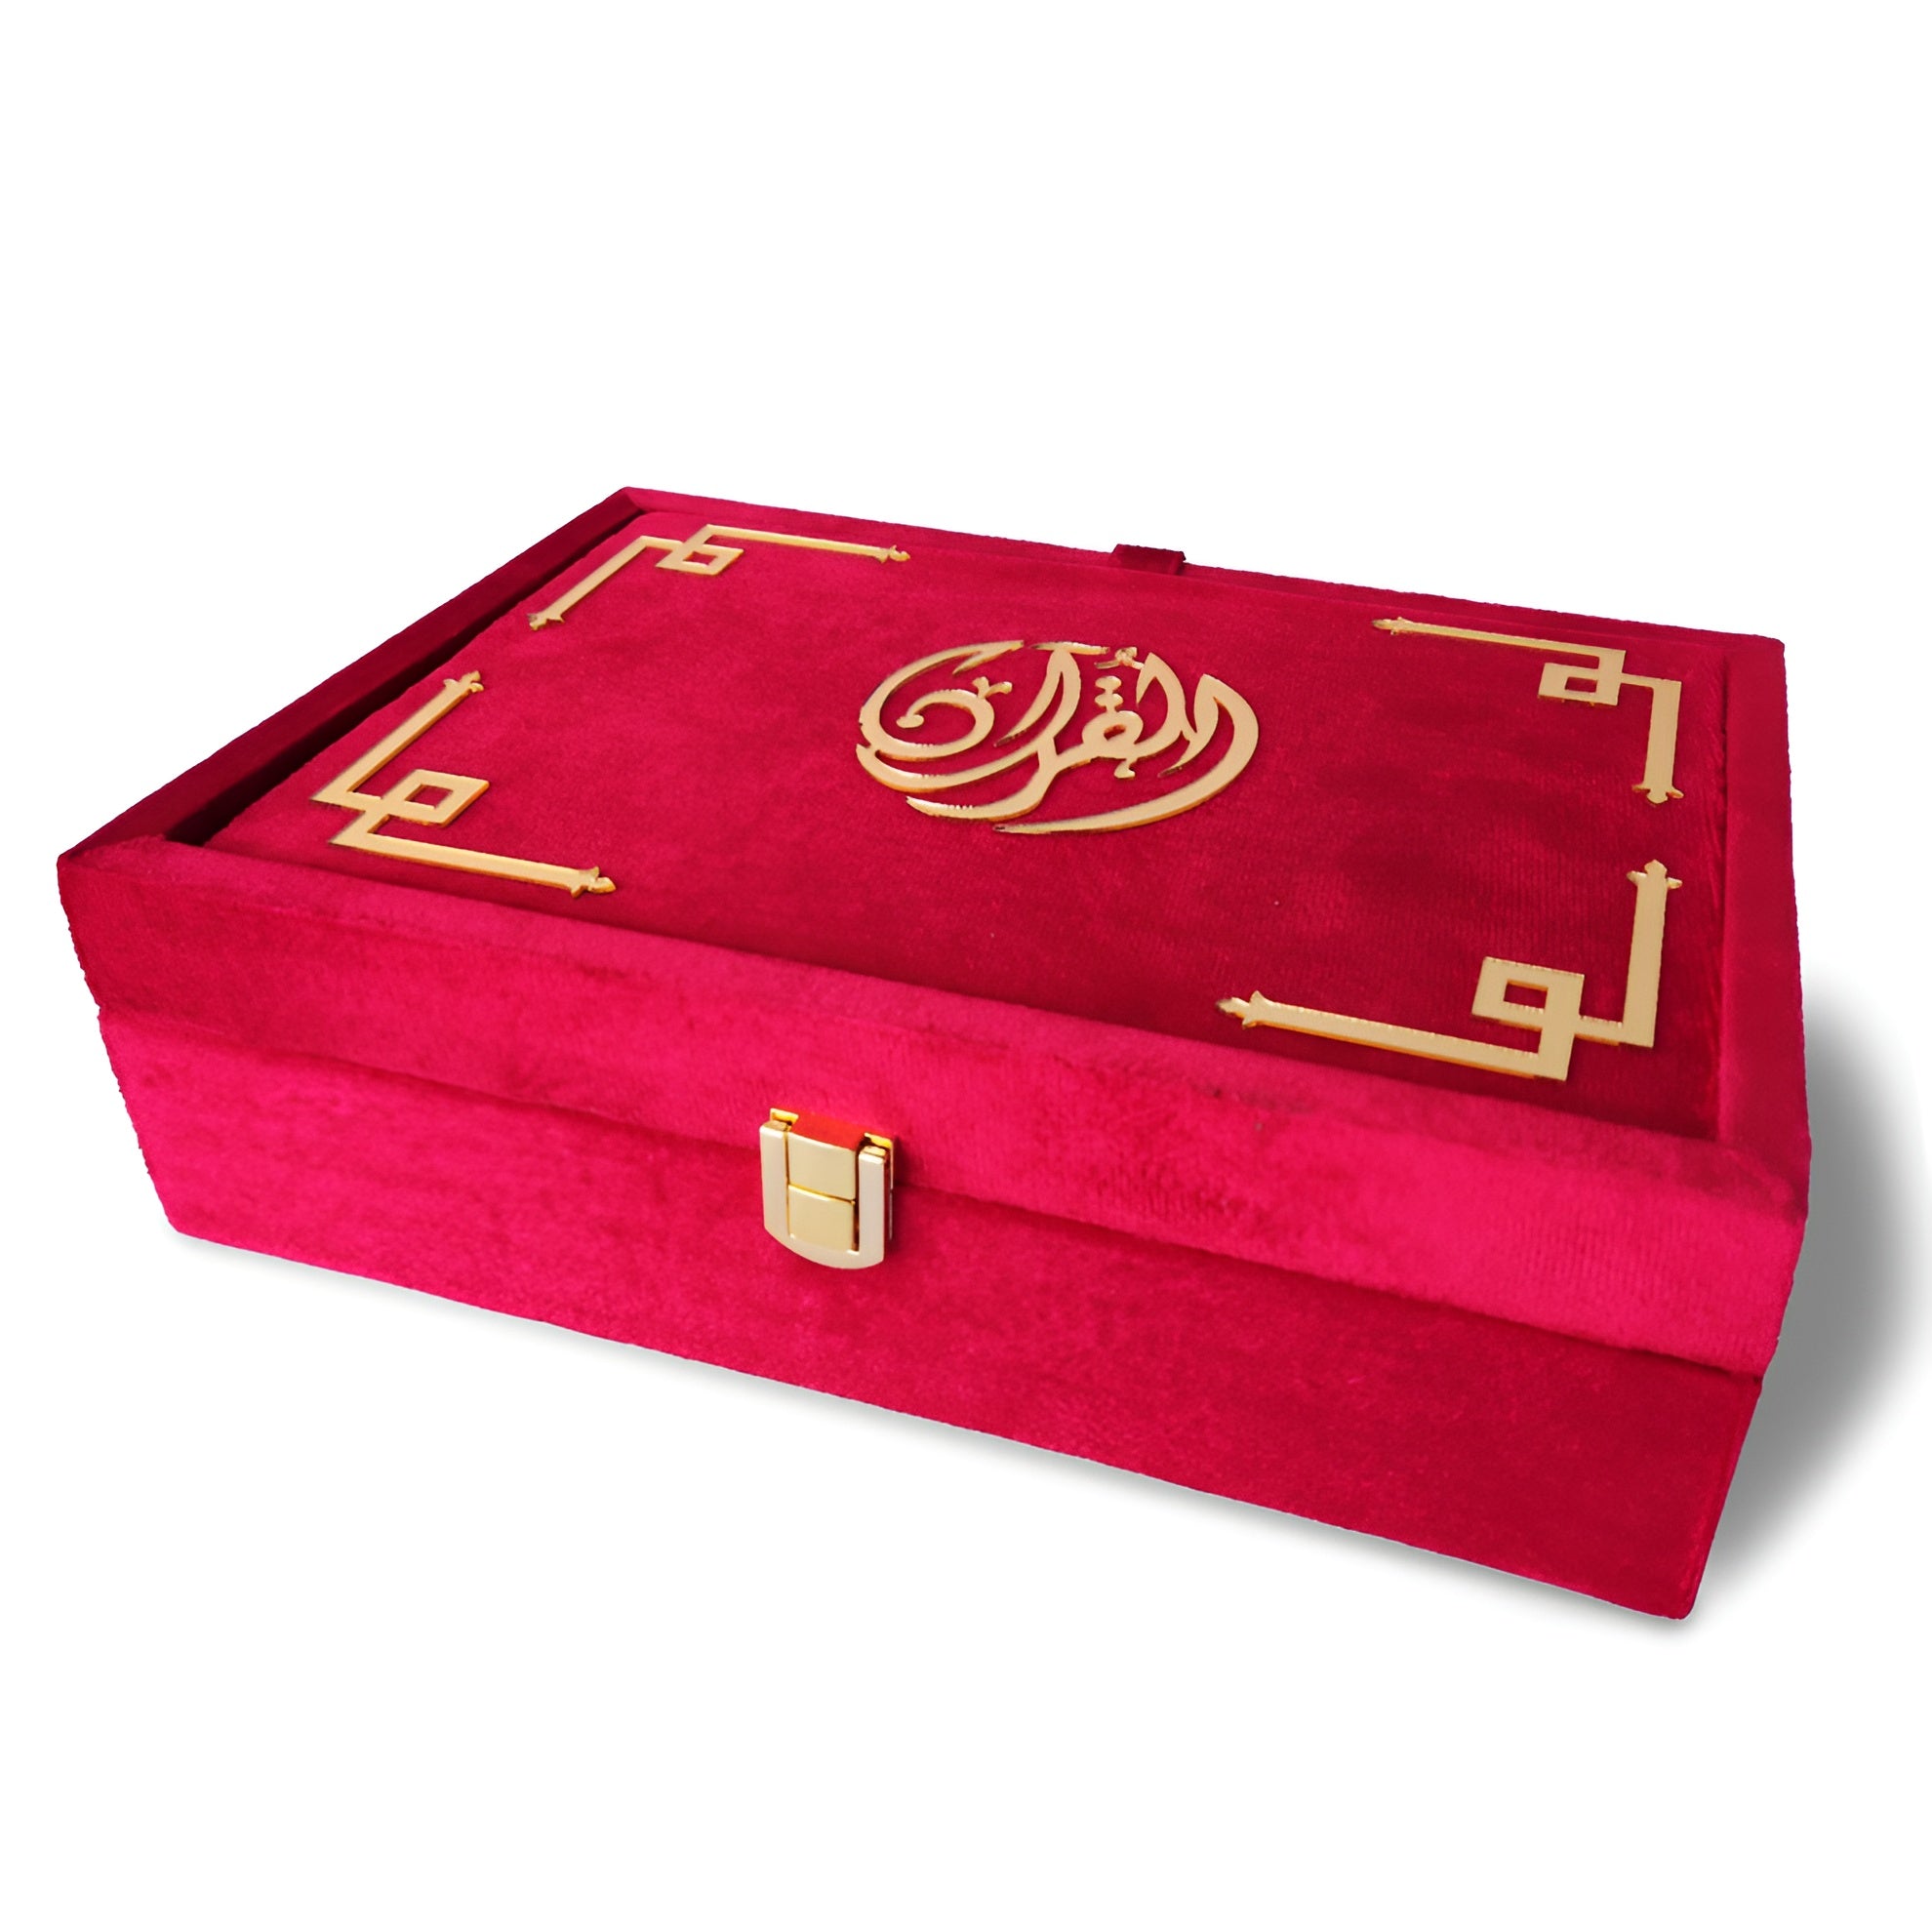 PINK PARADISE VELVET QURAN SET (WITH BOX STAND)